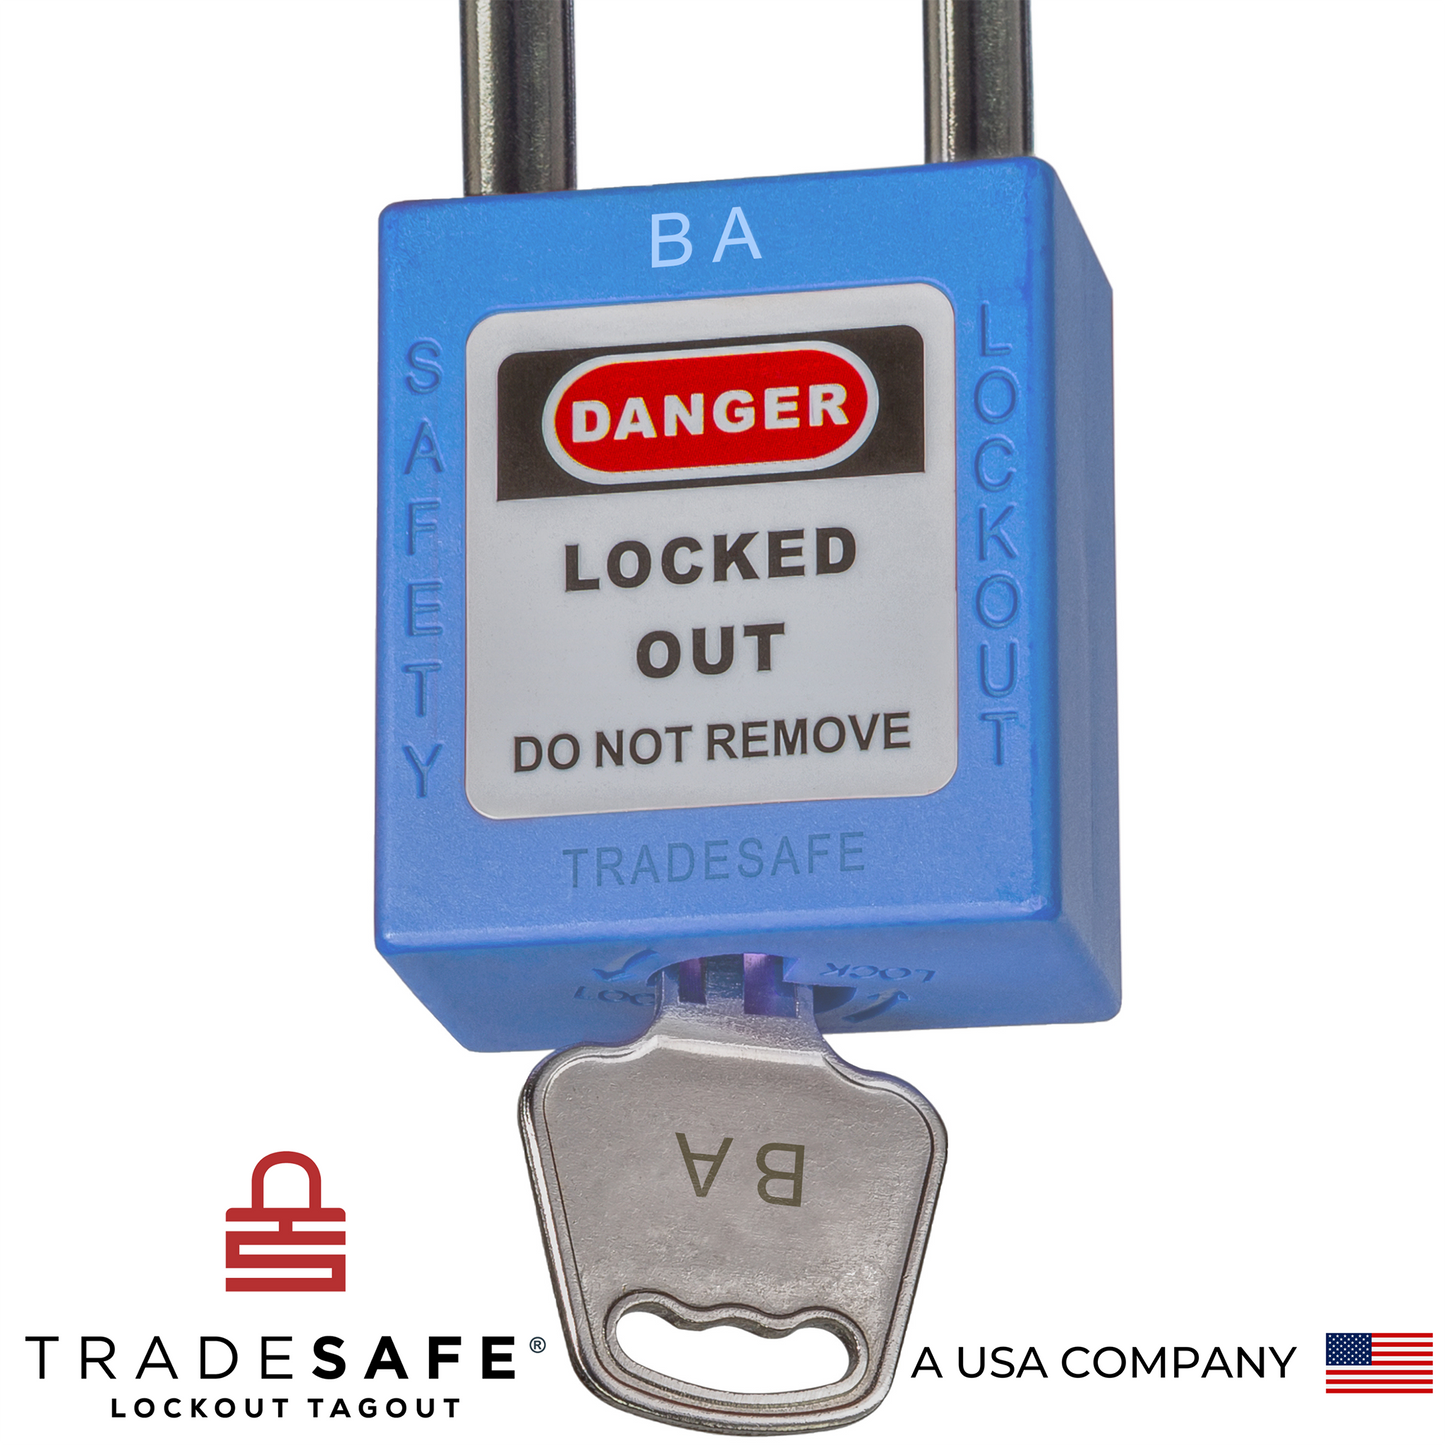 a close-up view of a blue loto padlock's body with a key inserted